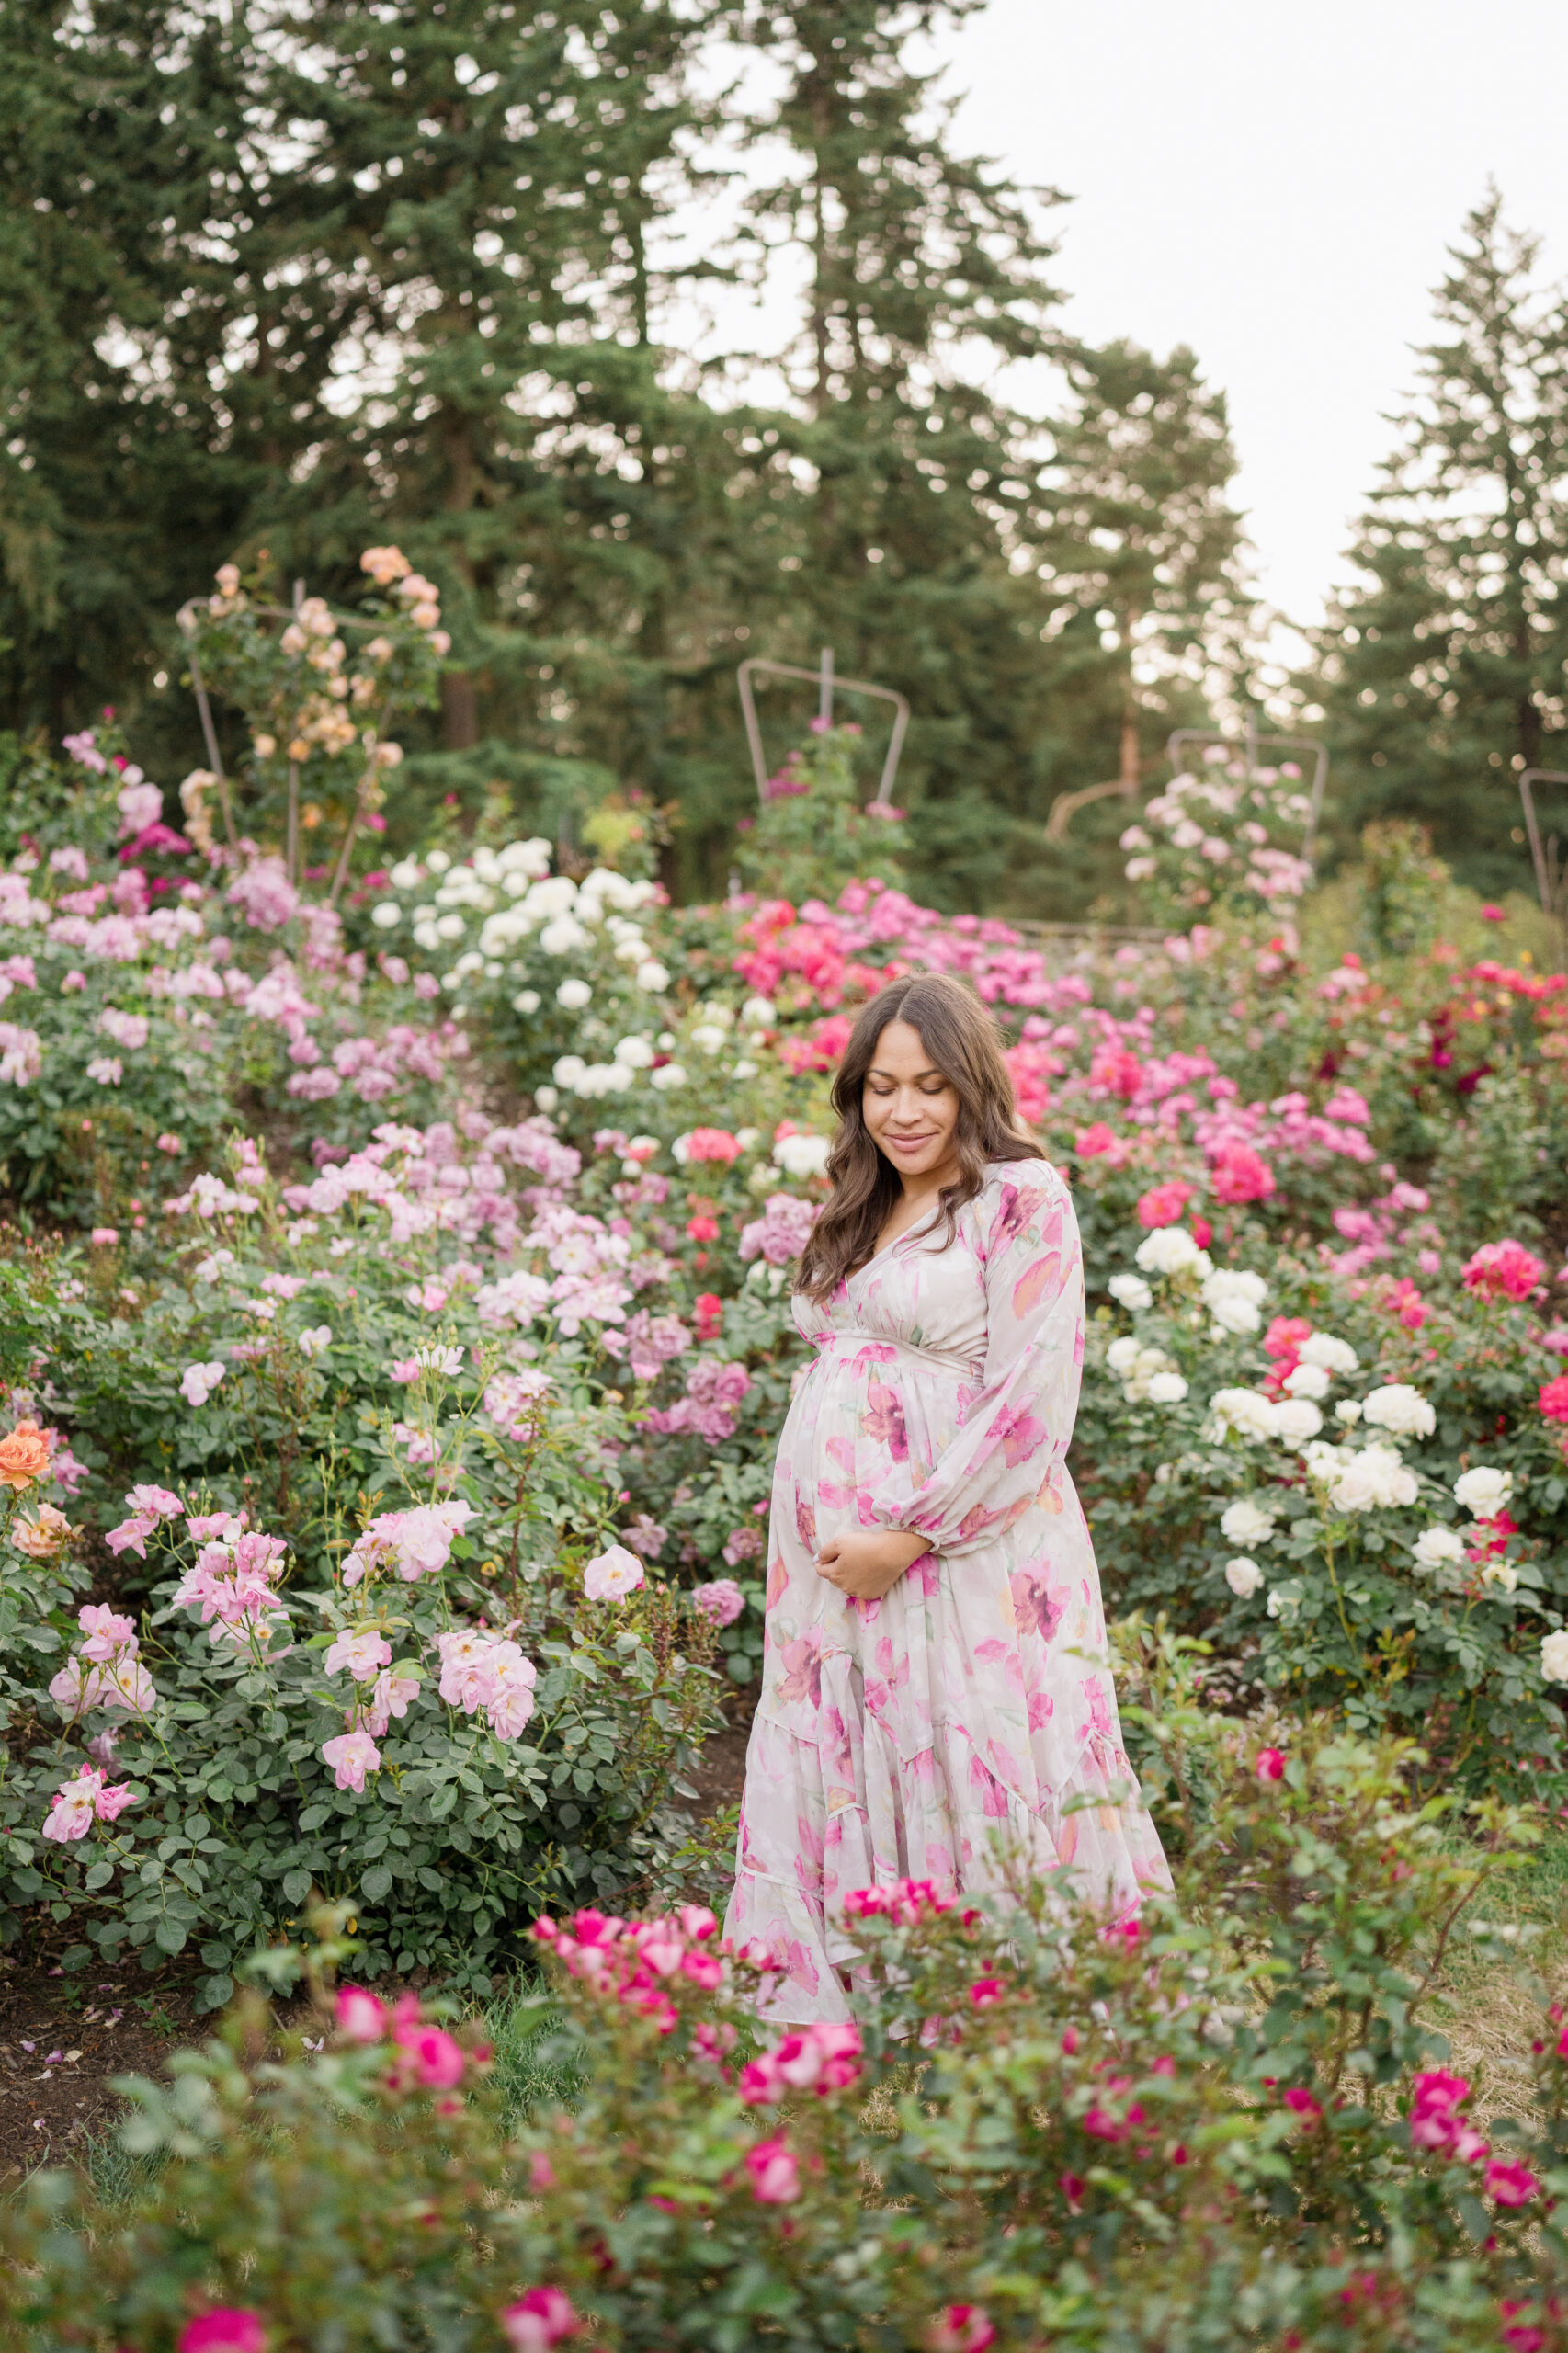 A pregnant woman at 5 months holds her bump and walks through a garden of roses.